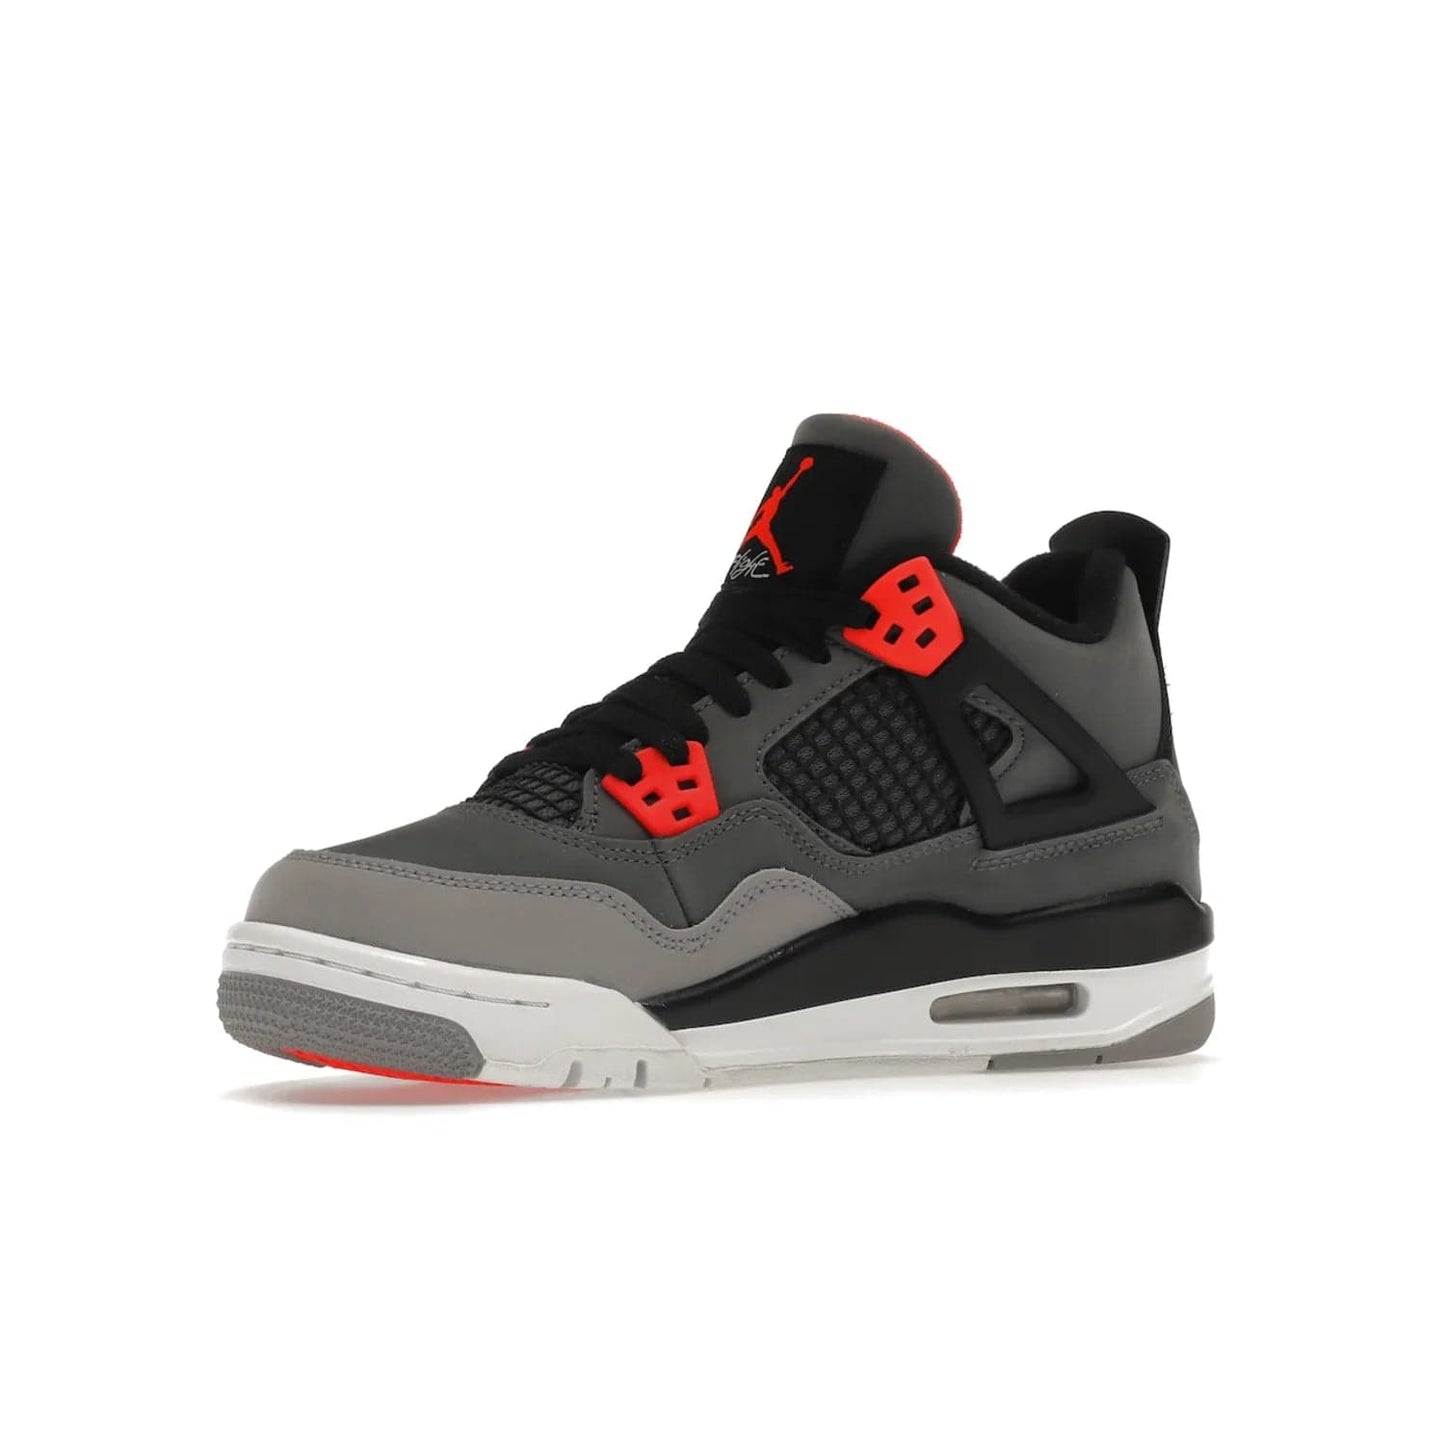 Jordan 4 Retro Infrared (GS) - Image 16 - Only at www.BallersClubKickz.com - Shop the Air Jordan 4 Retro Infrared (GS) for a classic silhouette with subtle yet bold features. Dark grey nubuck upper with lighter forefoot overlay, black accents, Infrared molded eyelets & woven tongue tag. Available June 2022.